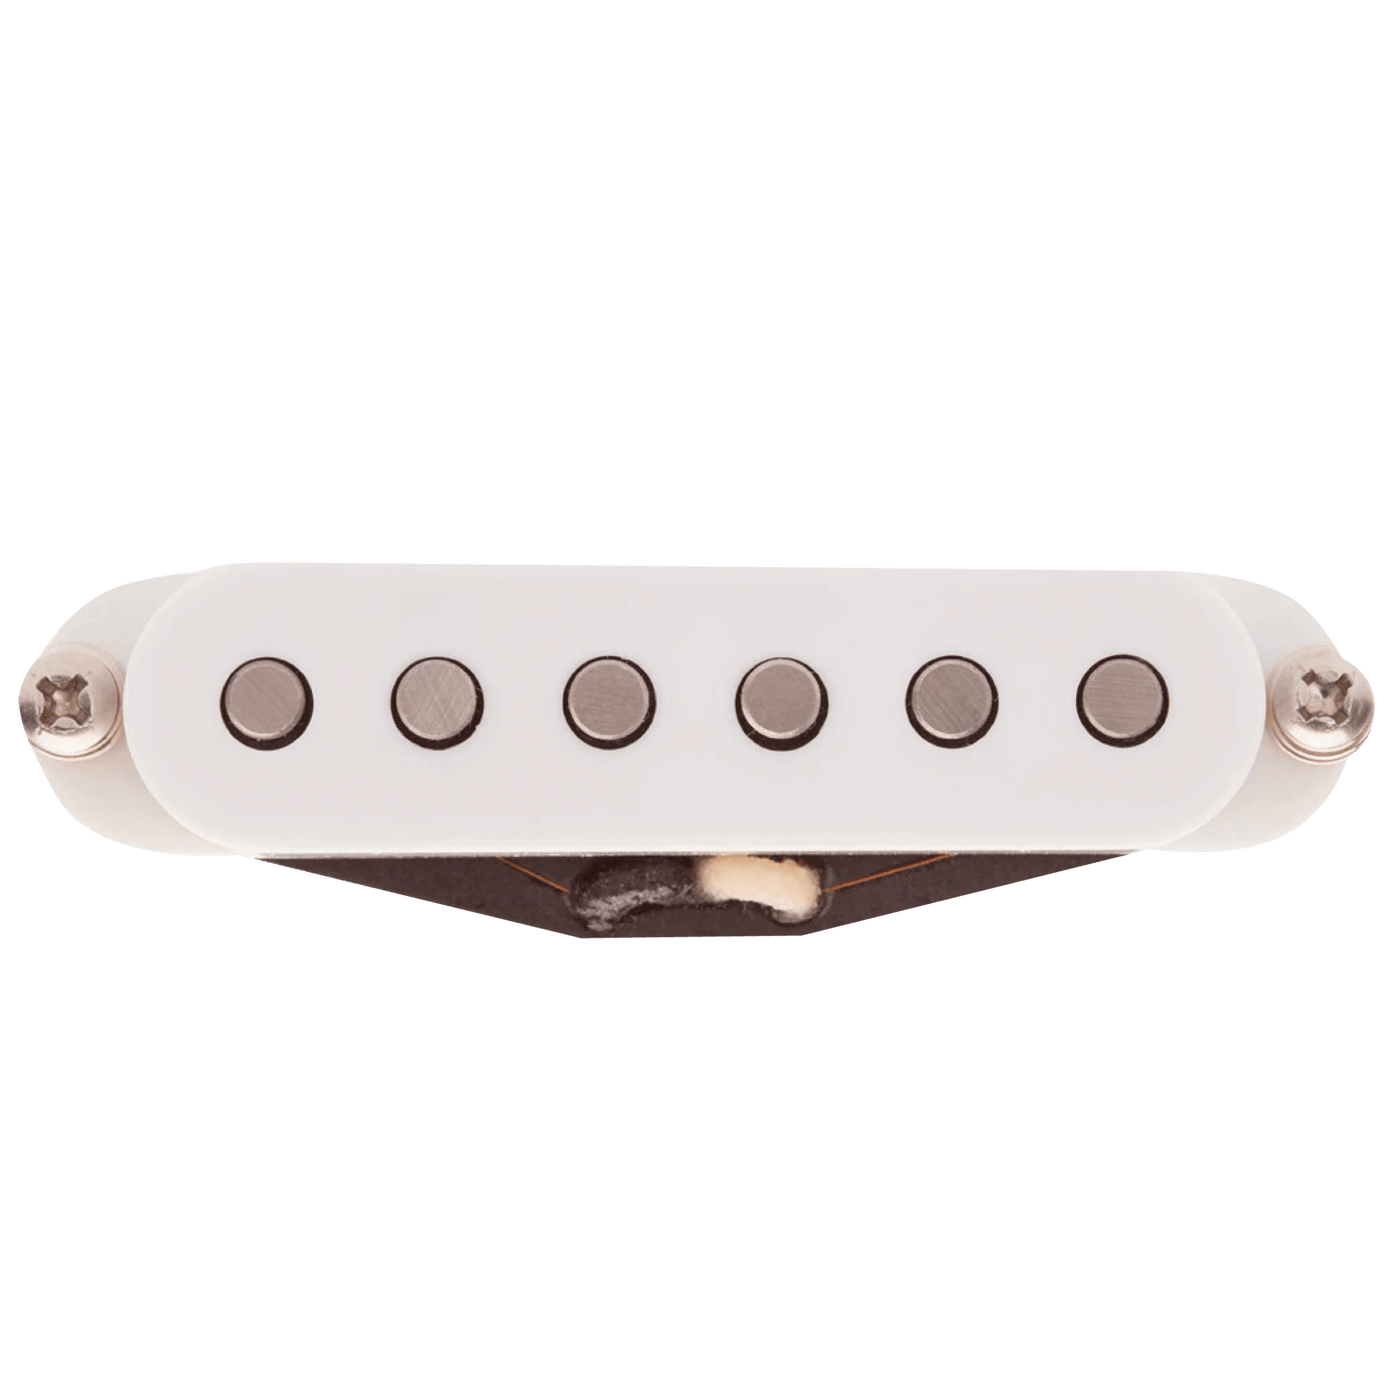 Suhr V60LP White (Neck) - $129990 - Gearhub - The V60 and V60LP pickups faithfully recreate the classic single-coil sounds of the 60’s. These pickups also use the same magnets that were used in the pickups made during this era. What you get are clear bell-like highs, warm and punchy mids, and big yet firm lows that are the hallmark of great vintage pickups.The V60LP pickup is wound using a proprietary winding process that replicates the hand-wound pattern of some early-60’s single-coil pickups which have a